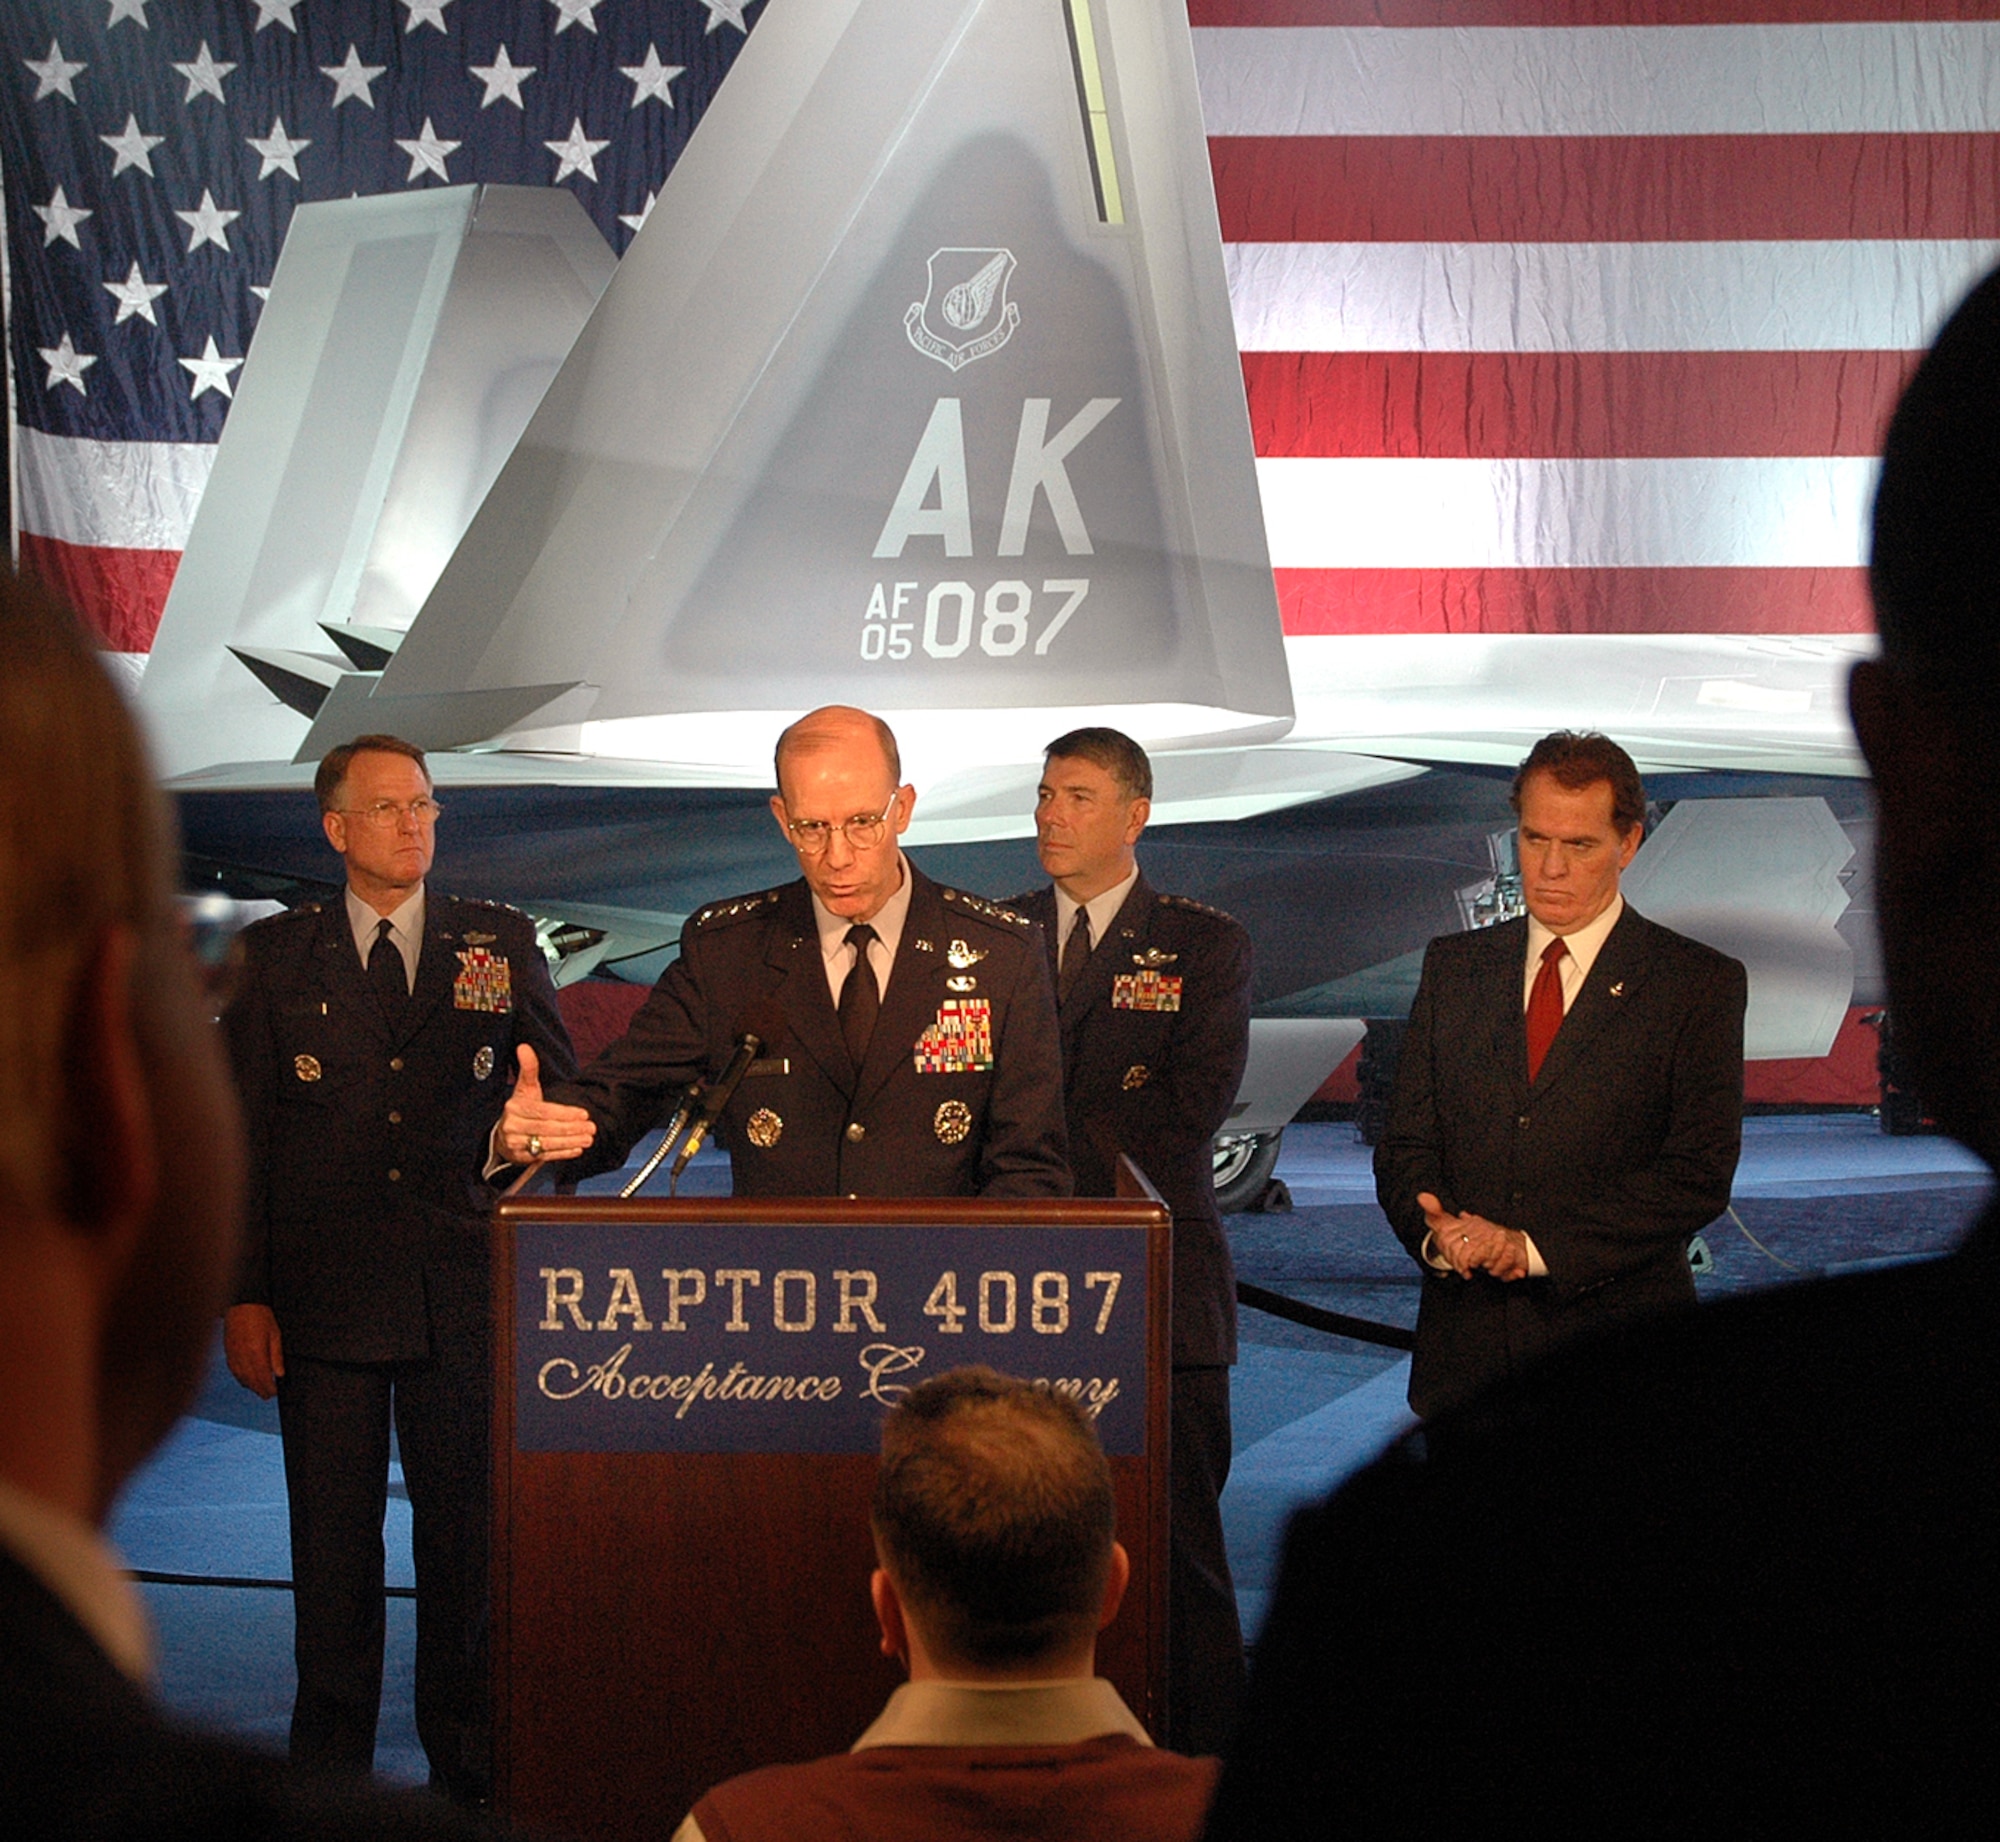 Gen. John D.W. Corley, the vice chief of staff from Headquarters U.S. Air Force, speaks during the acceptance ceremony for Pacific Air Force's first F-22 Raptor Feb. 12 at Marietta, Ga. This F-22 is the first of several that will be assigned to PACAF at Elmendorf Air Force Base, Alaska. The F-22's combination of stealth, supercruise, maneuverability, and integrated avionics, coupled with improved supportability, represents an exponential leap in warfighting capabilities. (U.S. Air Force photo/John Rossino)